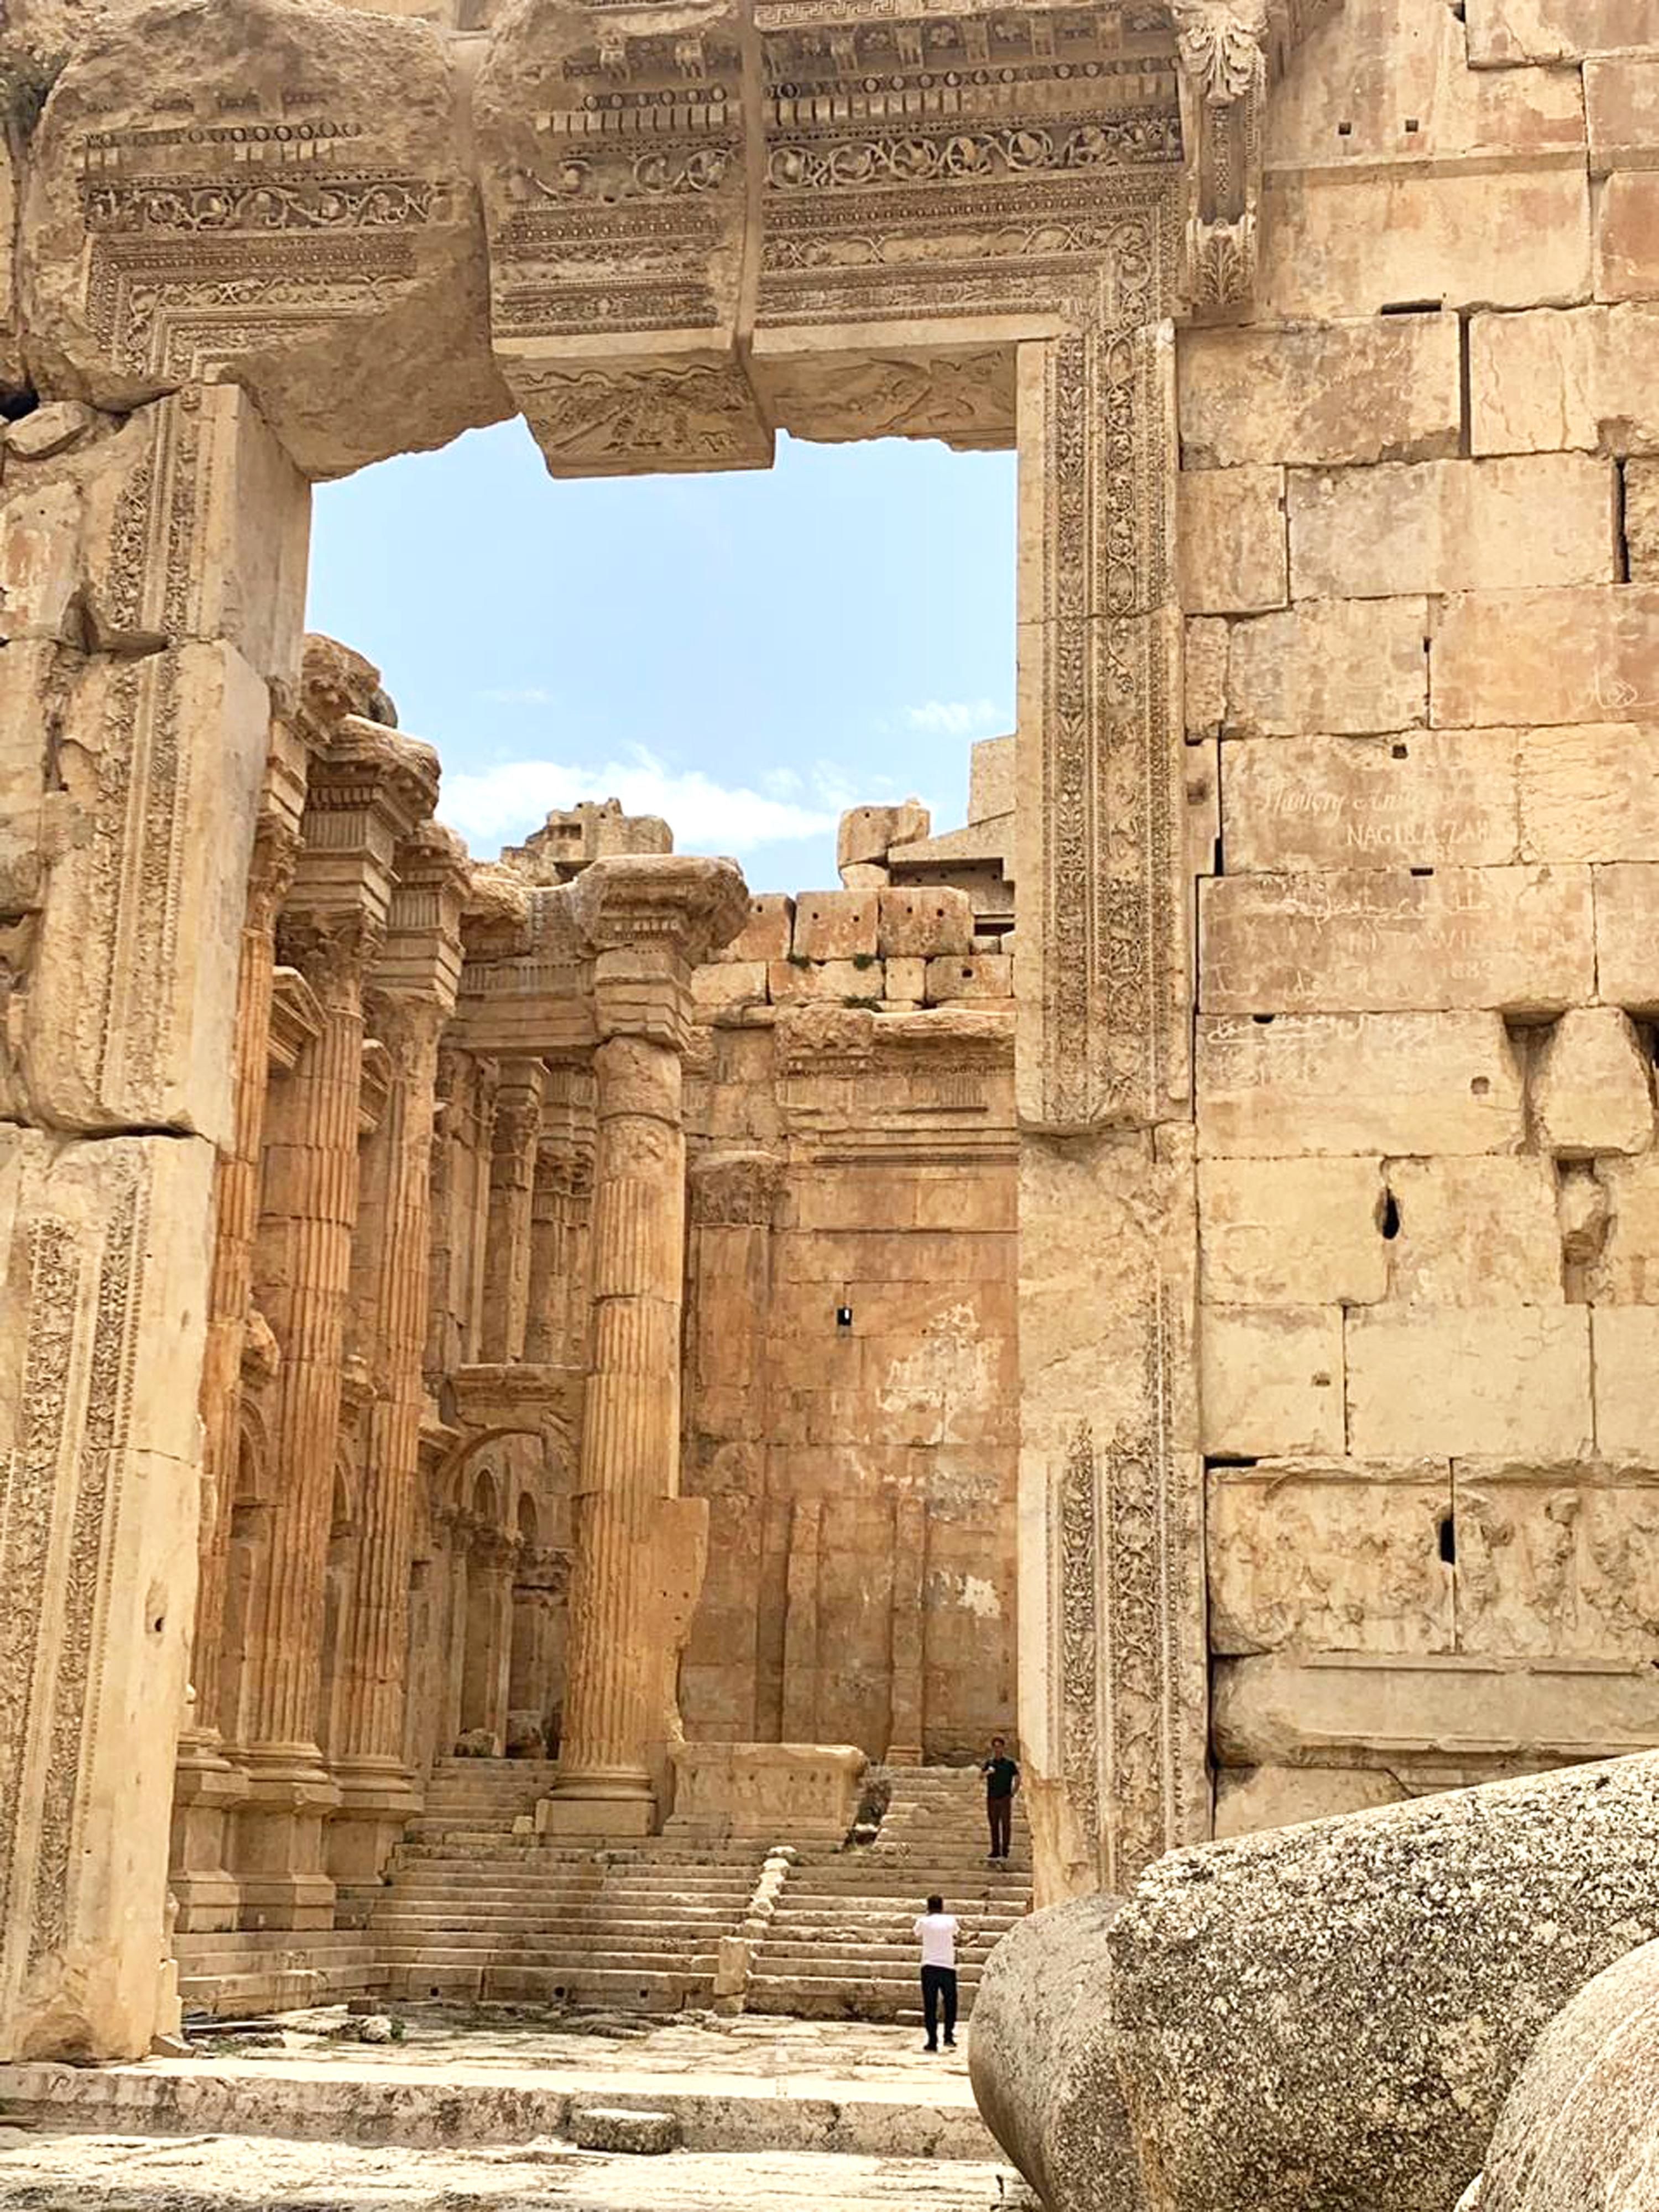 The entrance of the Temple of Bacchus at Baalbeck